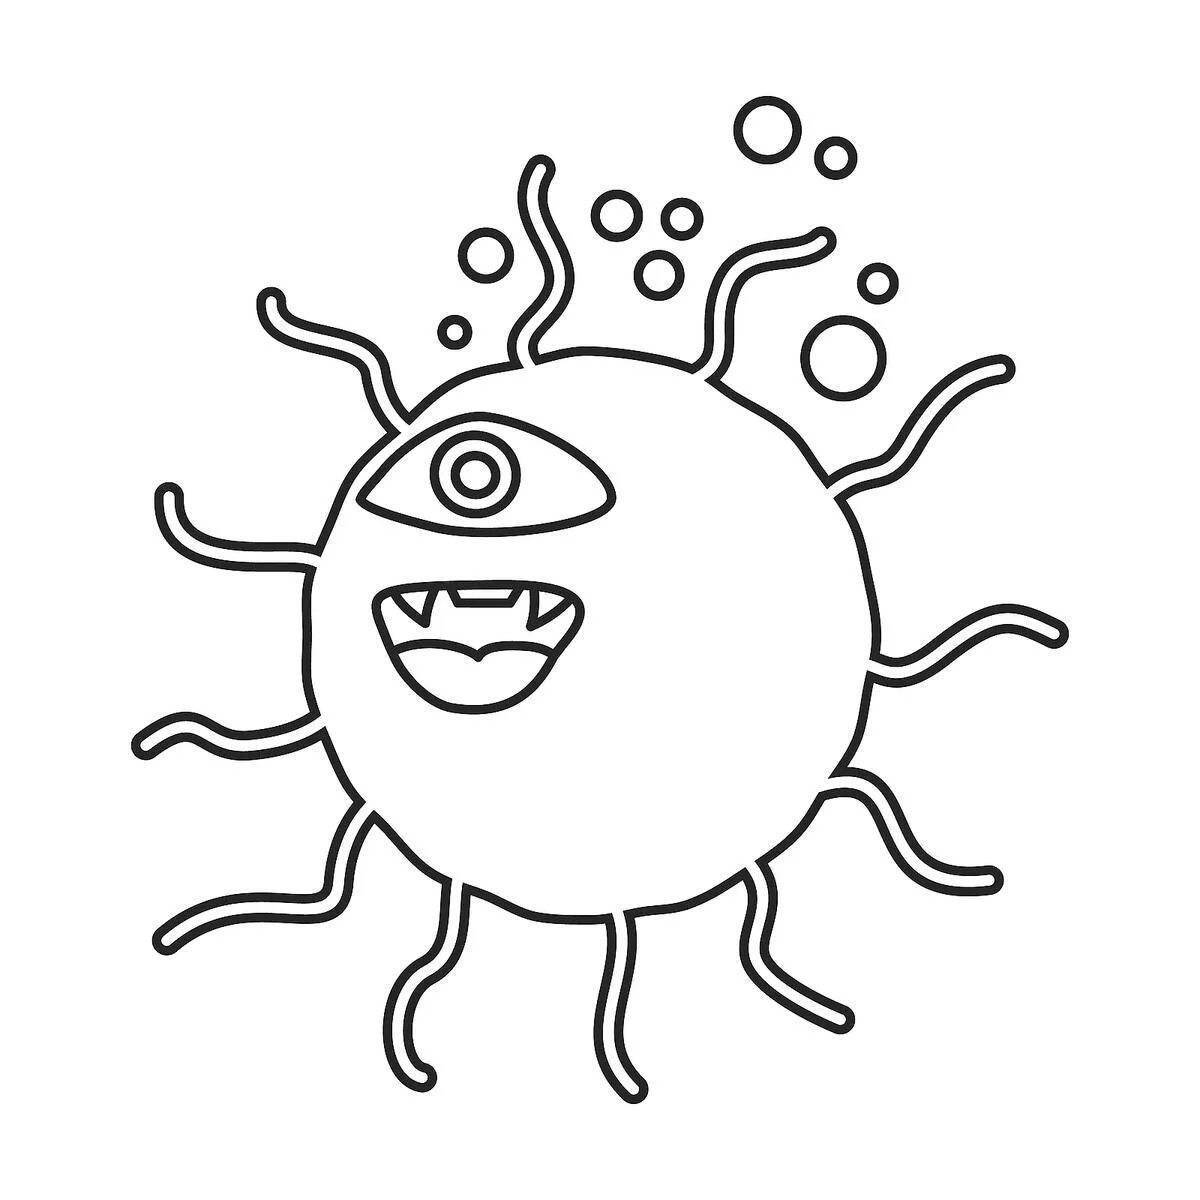 Exciting viruses and germs coloring book